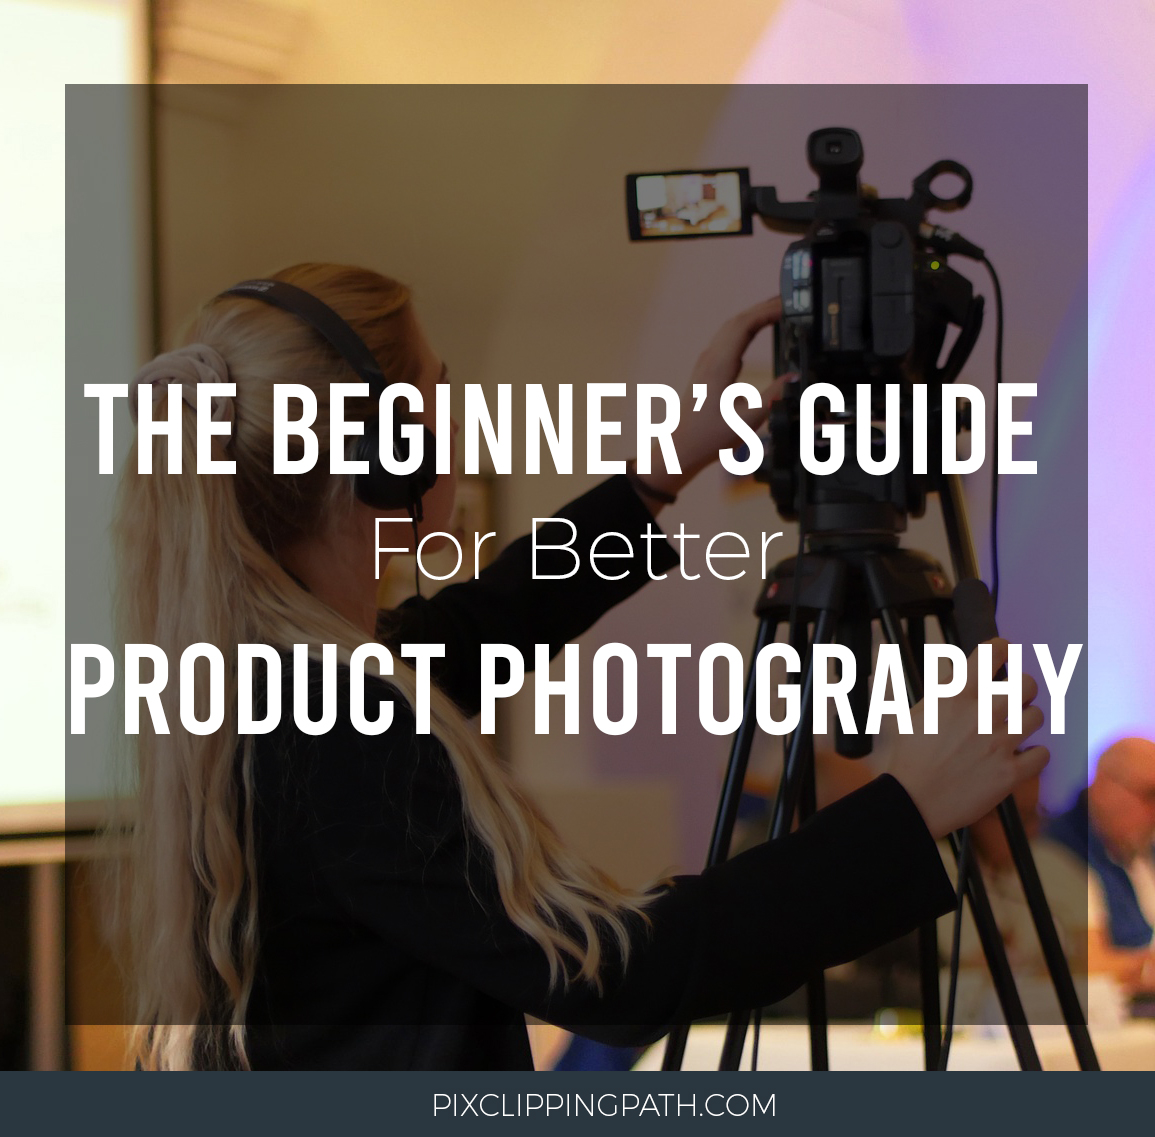 The Beginner’s Guide For Better Product Photography